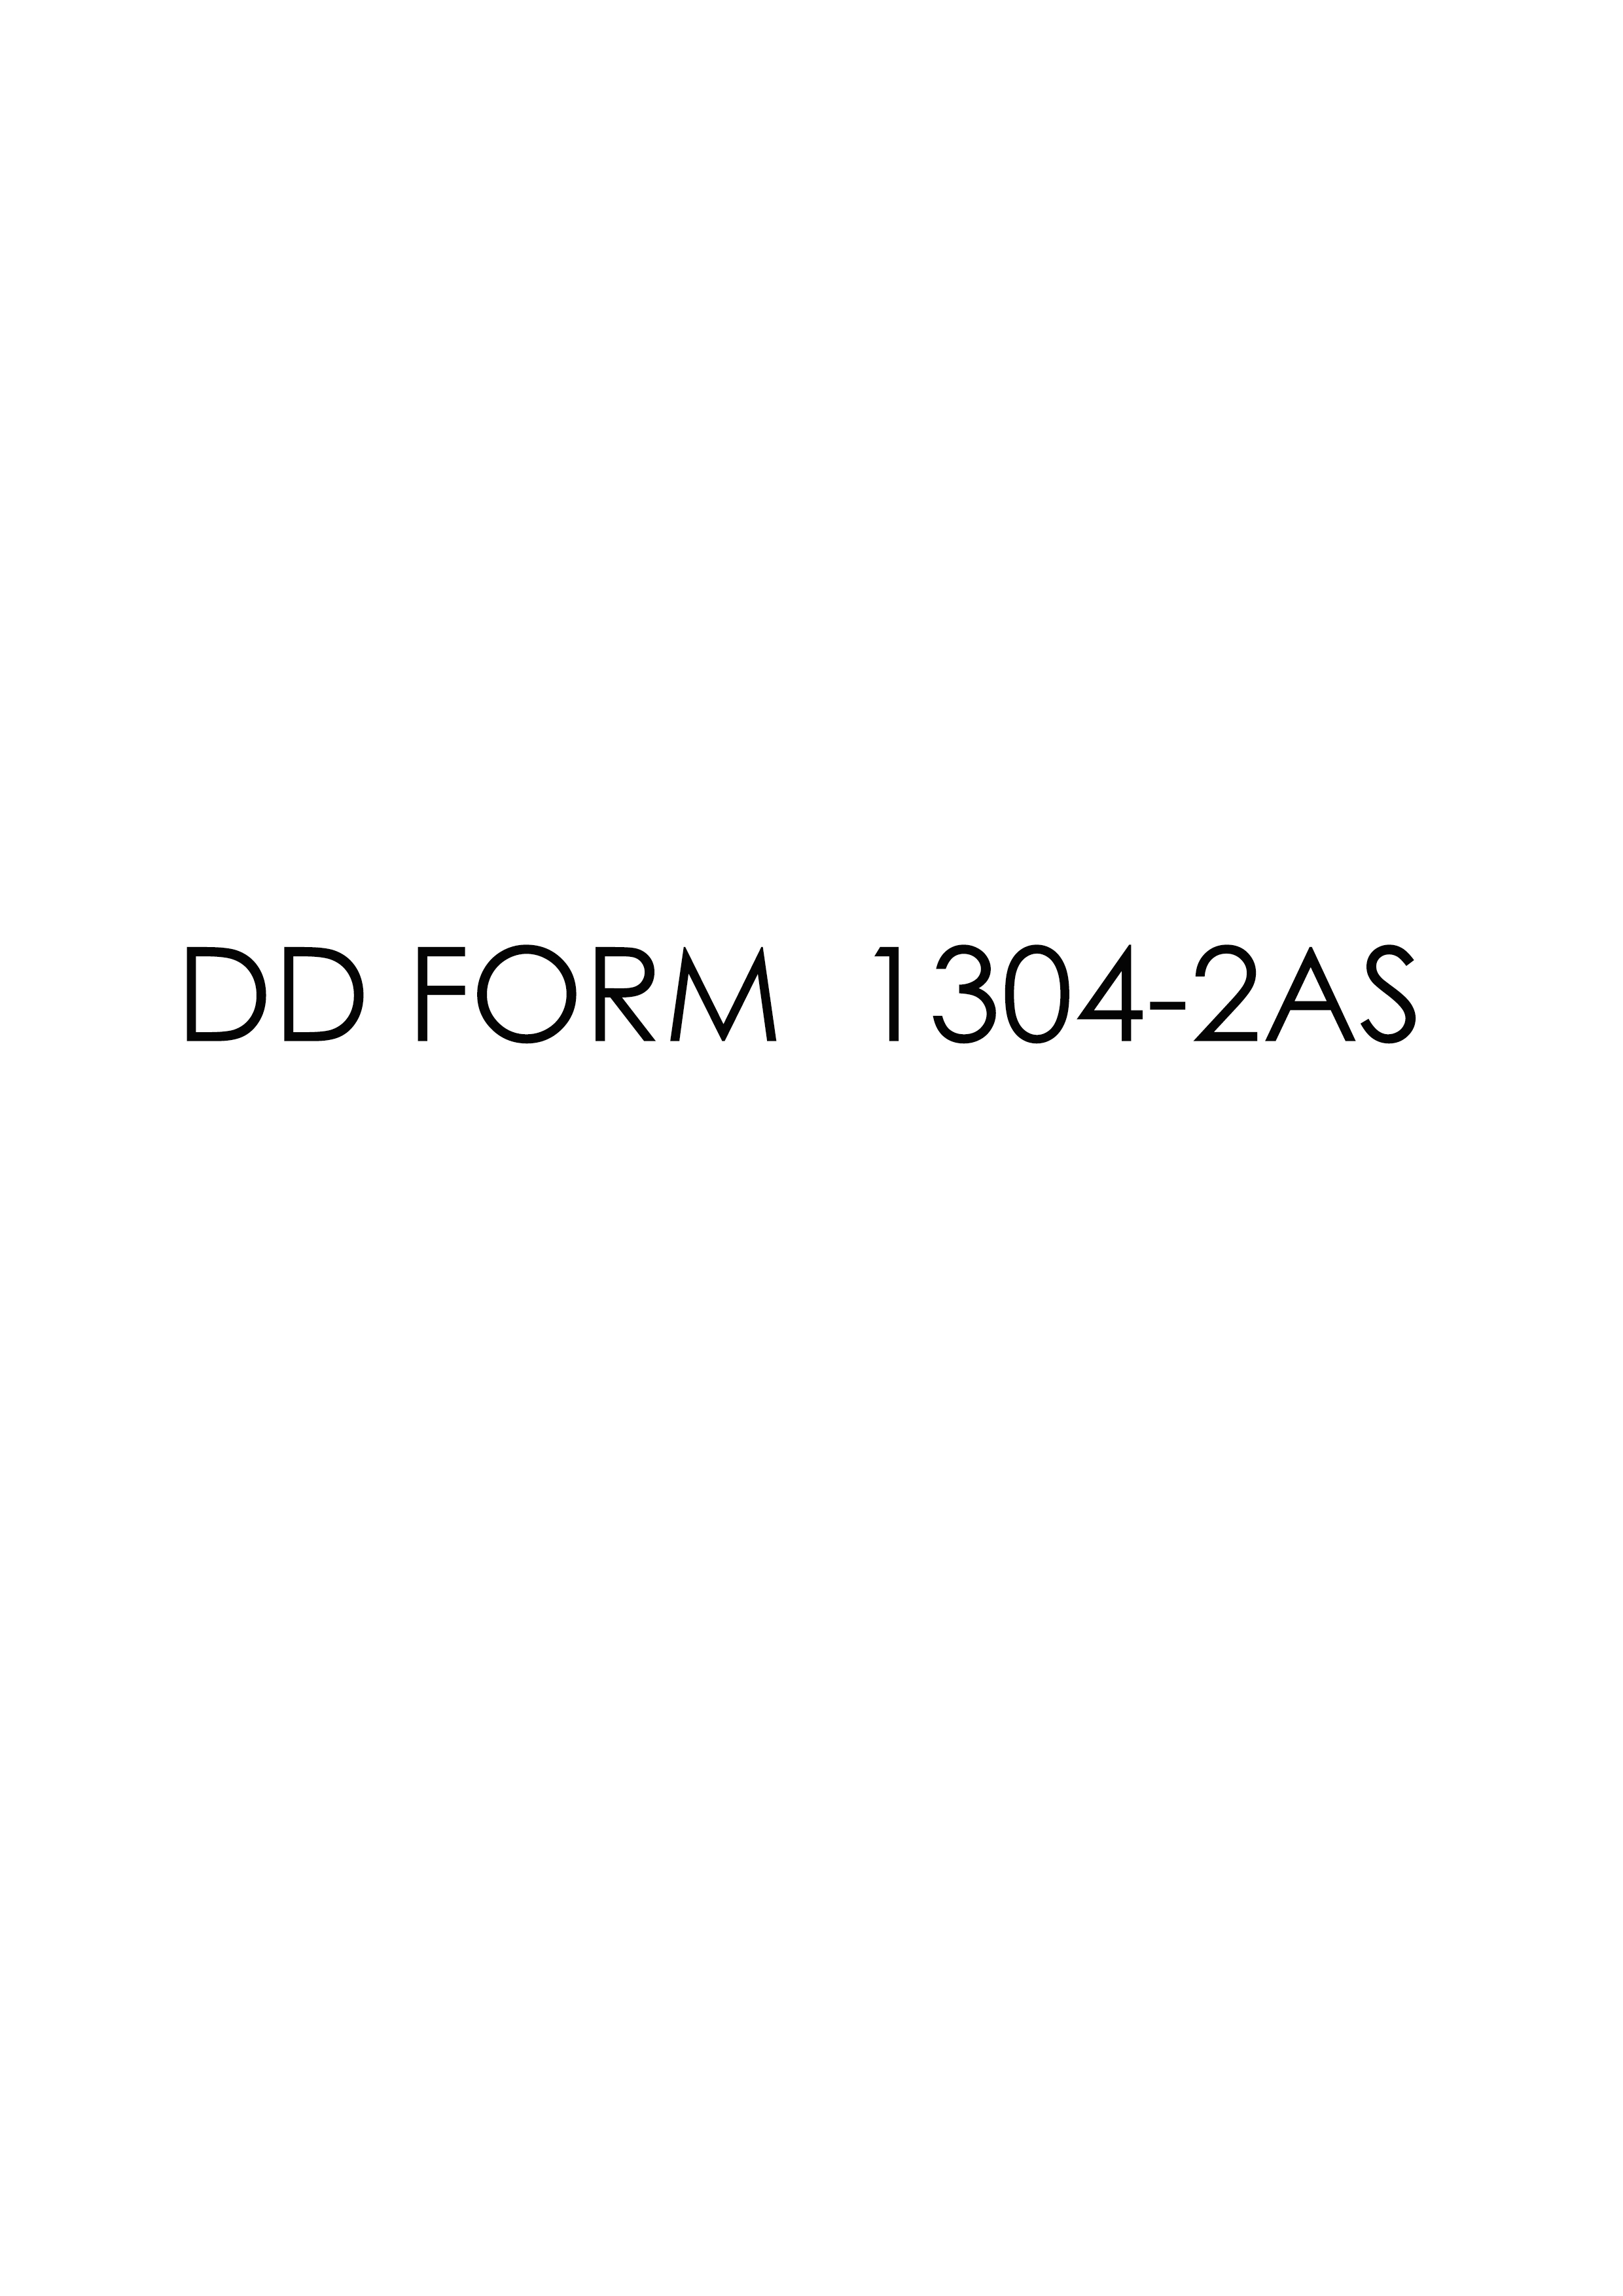 Download Fillable dd Form 1304-2AS